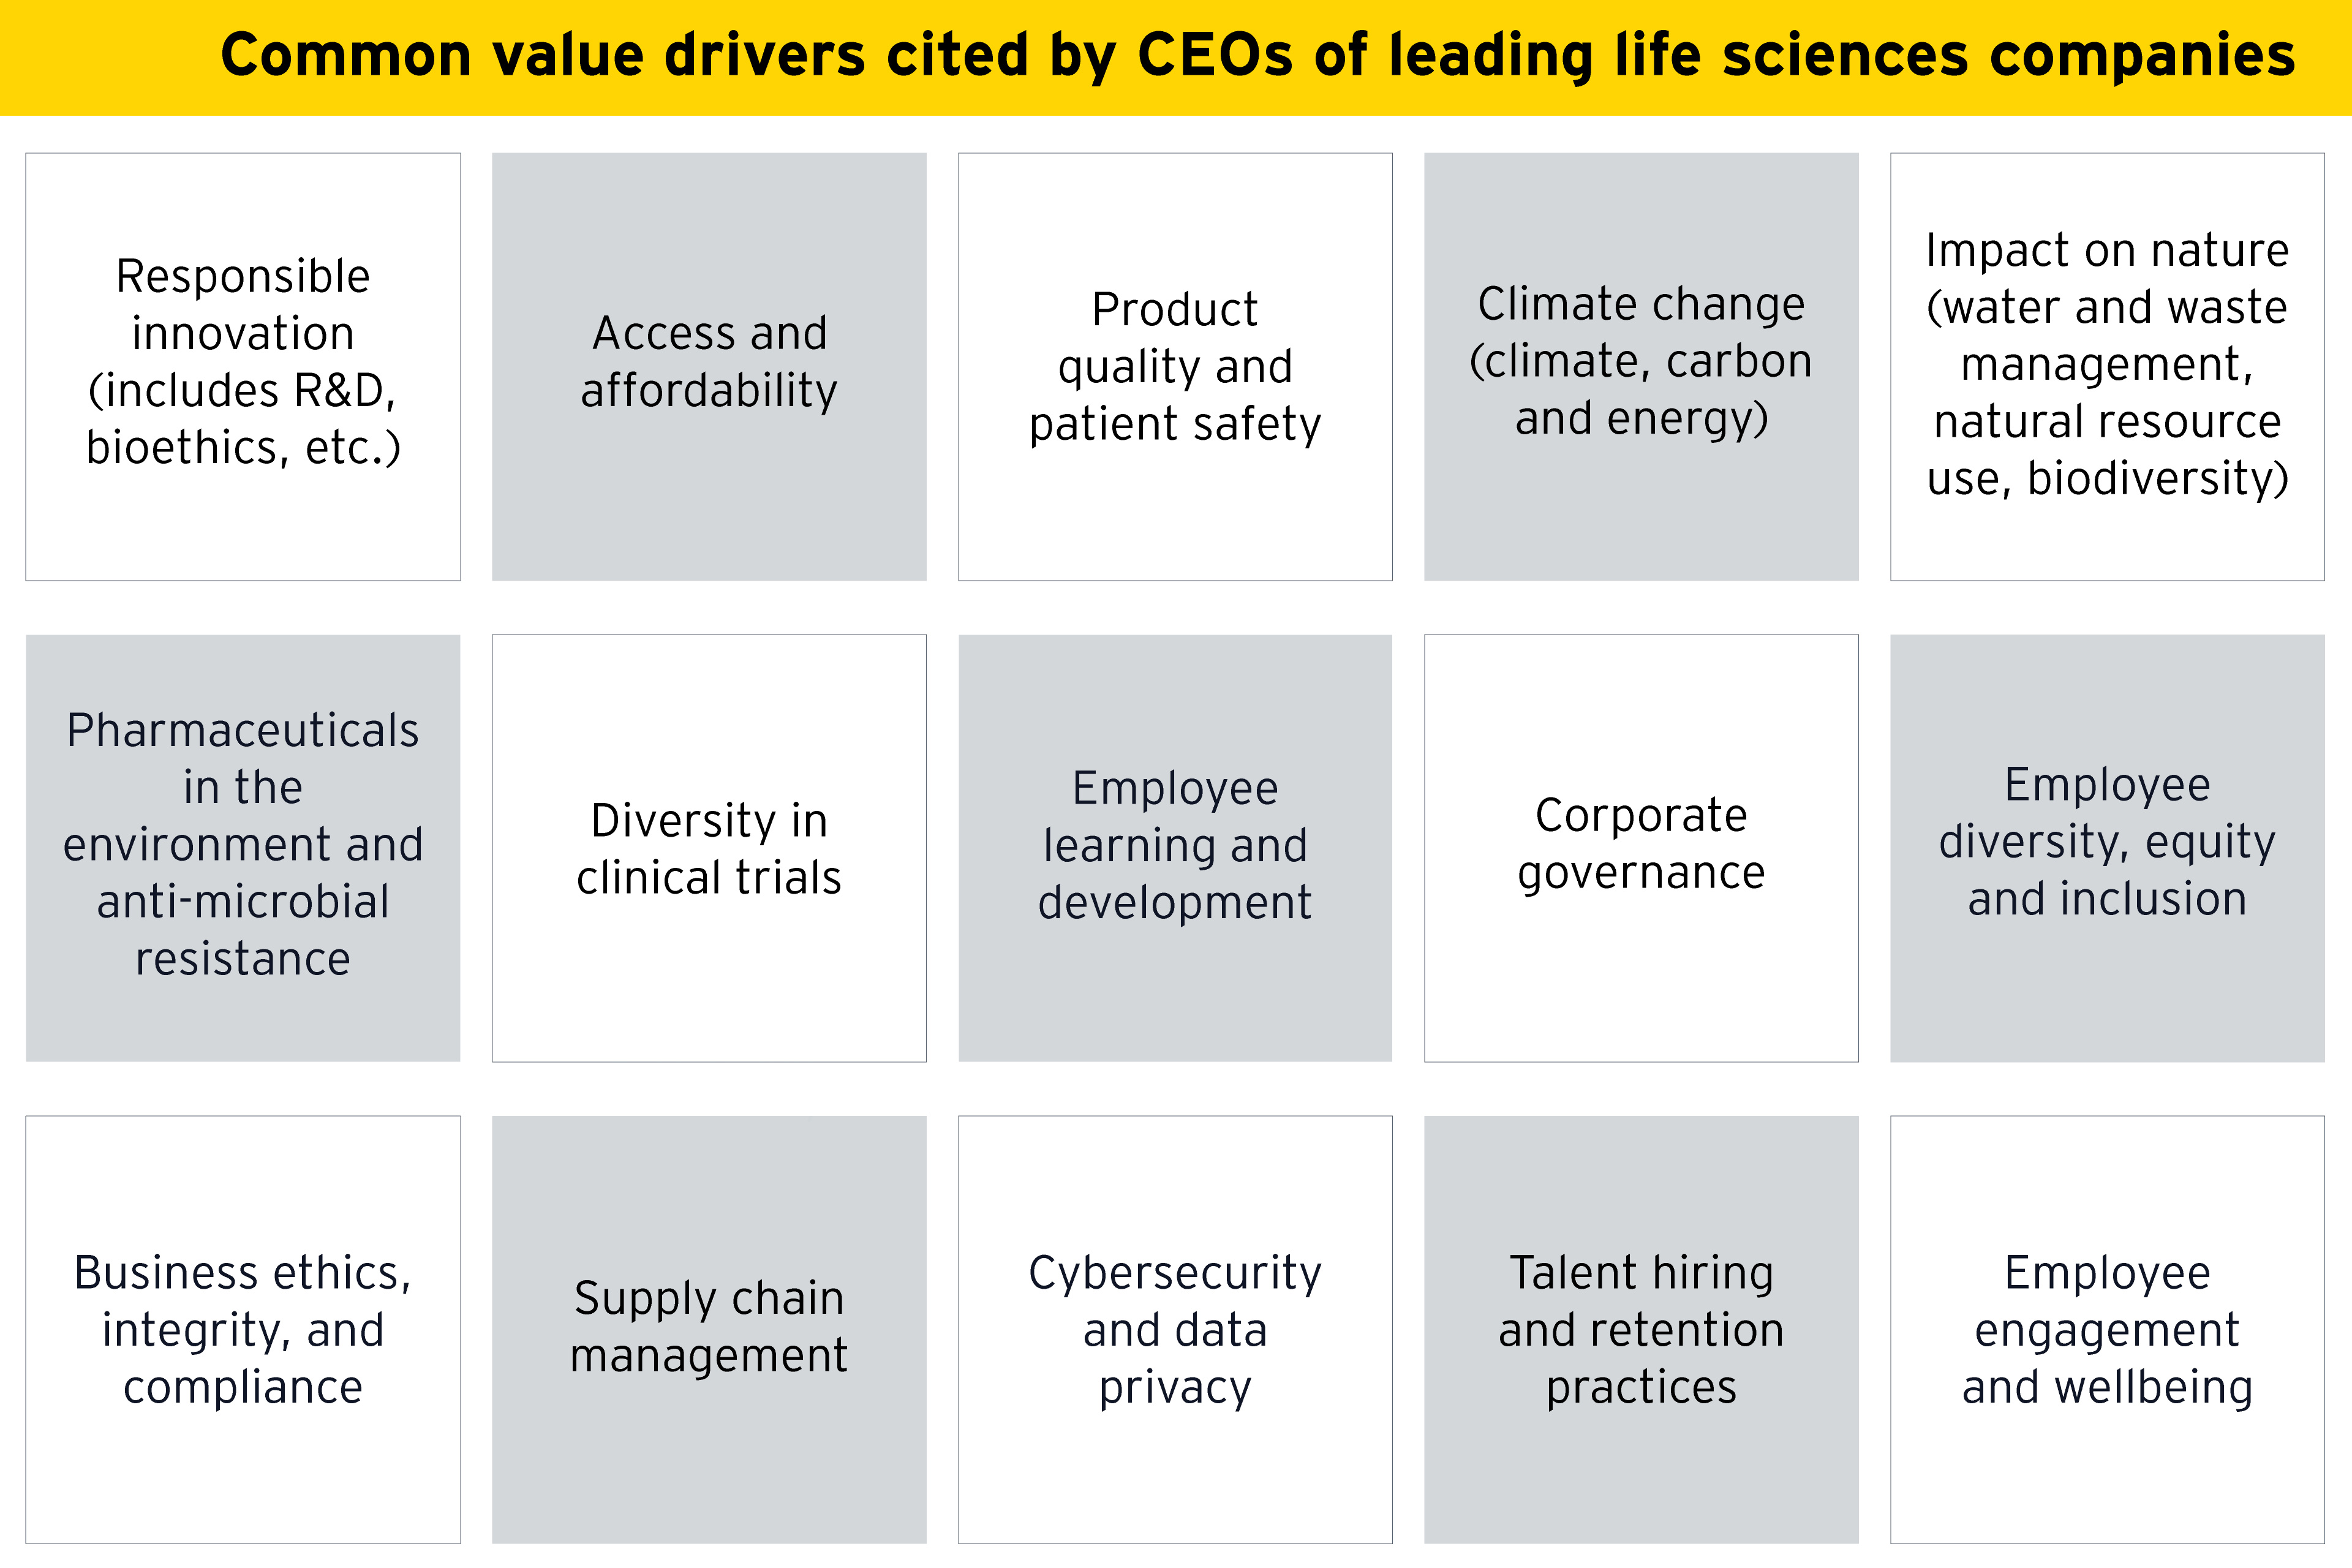 Defining and internalizing sustainability in life sciences